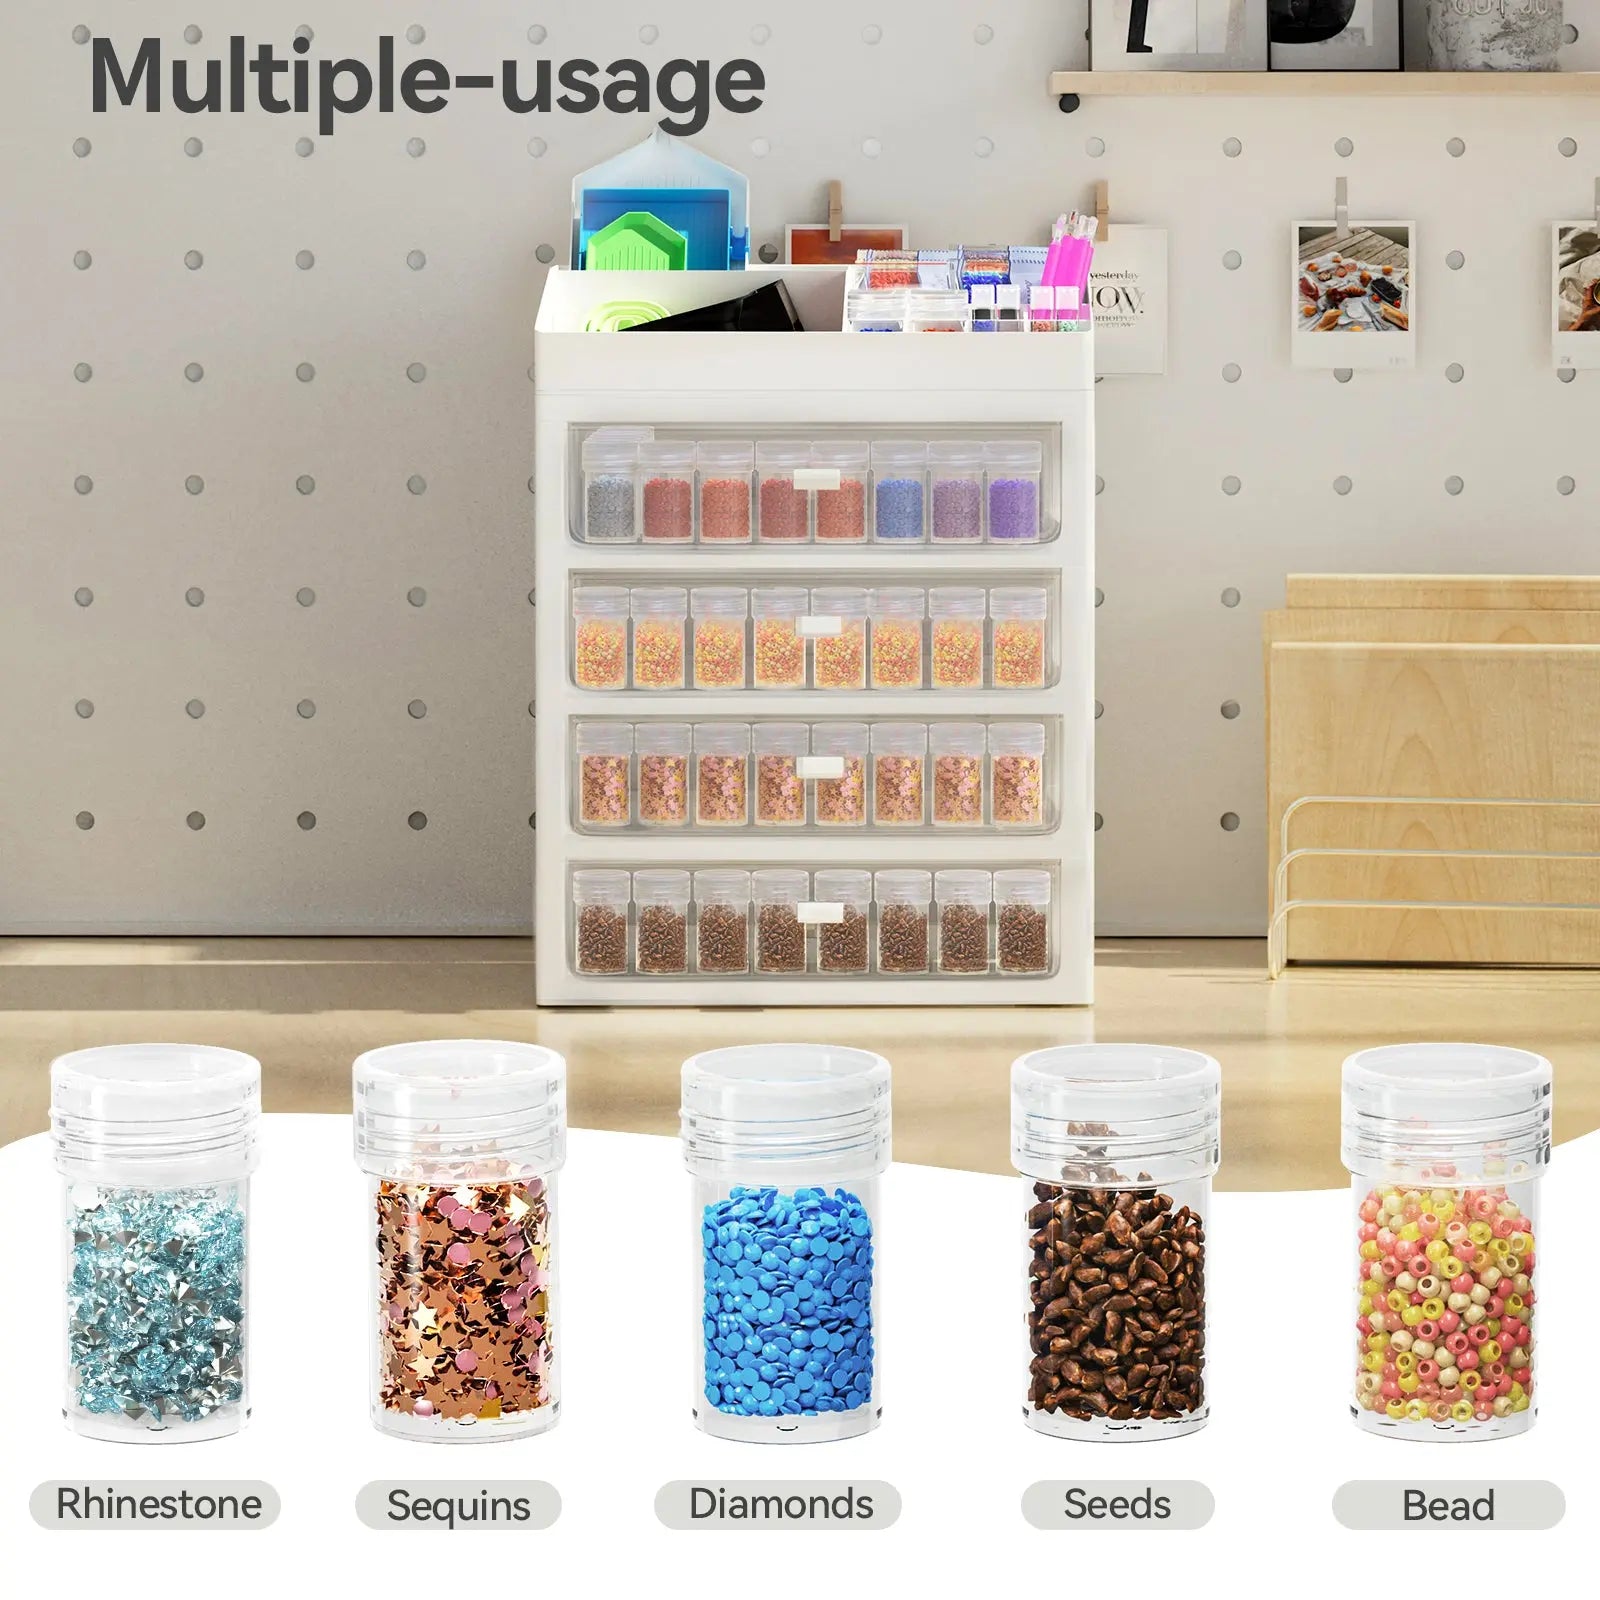 Diamond Painting Storage Container, Portable 46 Grid Bead Boxes